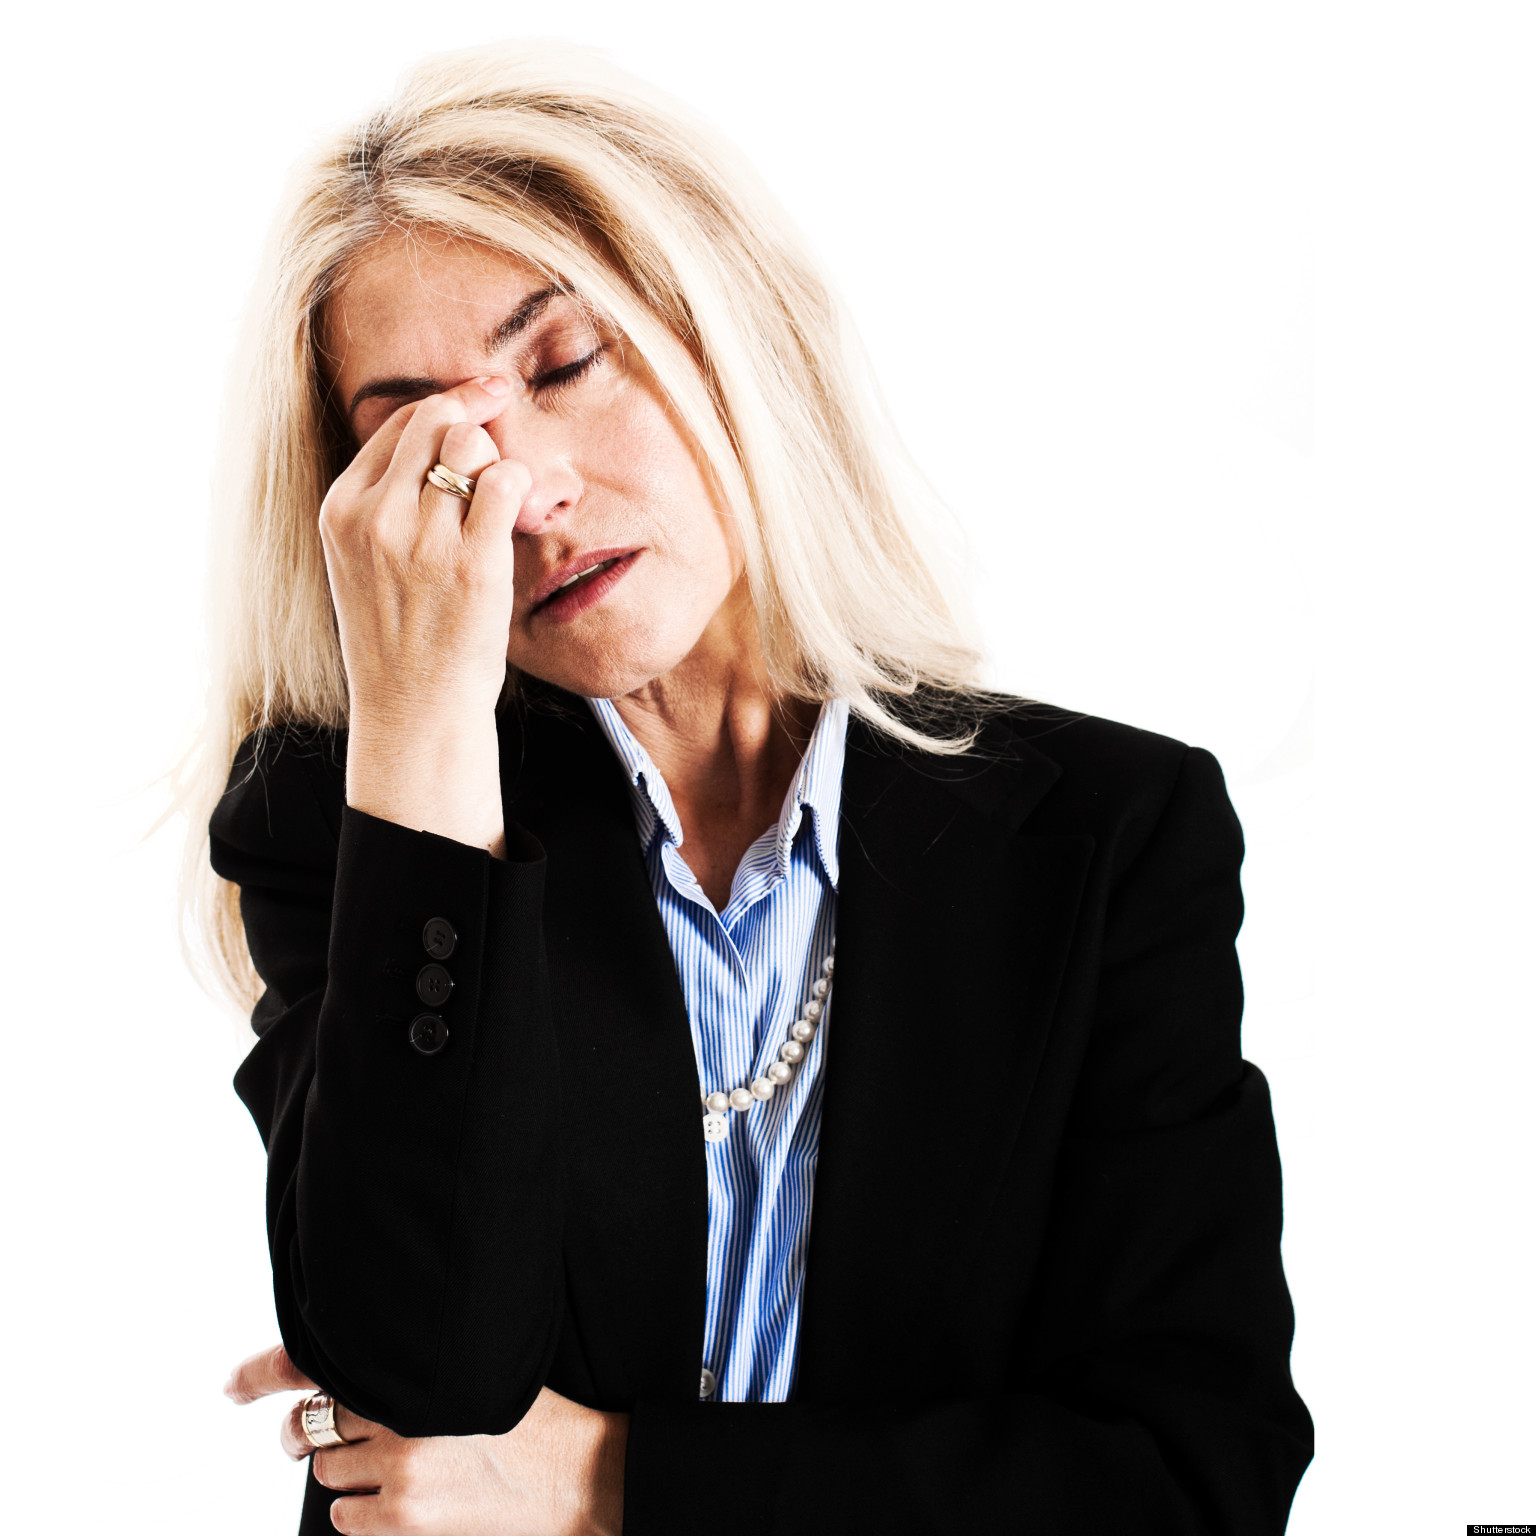 This Menopause Treatment Could Reduce Hot Flashes, According To Study | HuffPost1536 x 1536